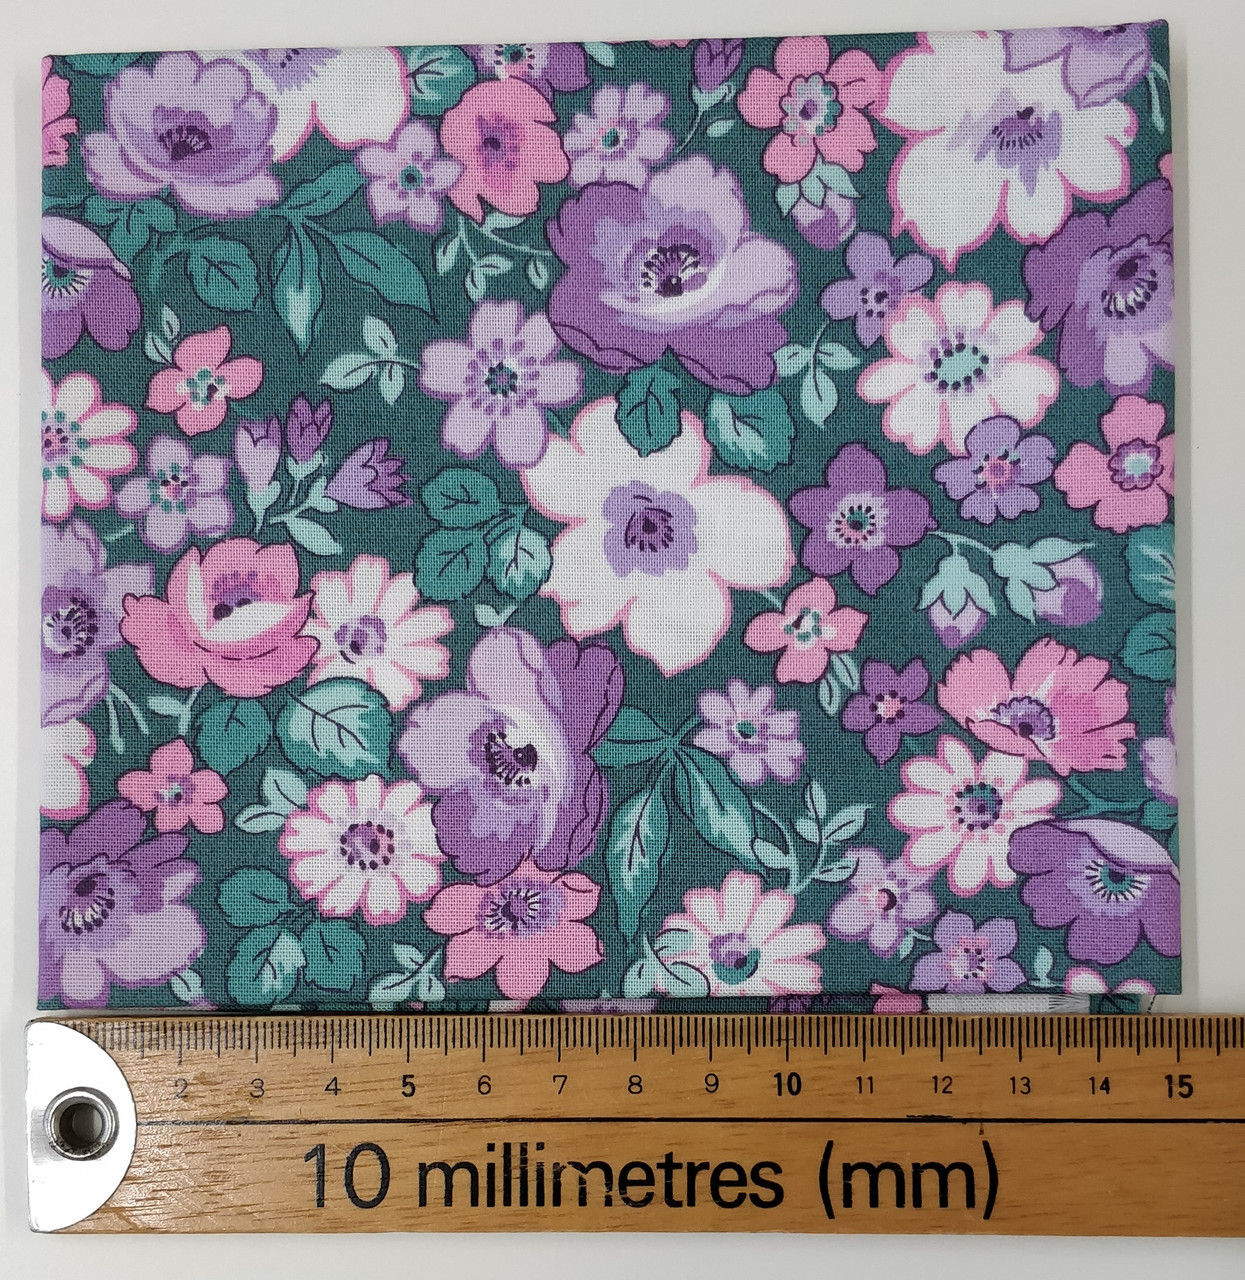 Scales of flowers shown with a ruler